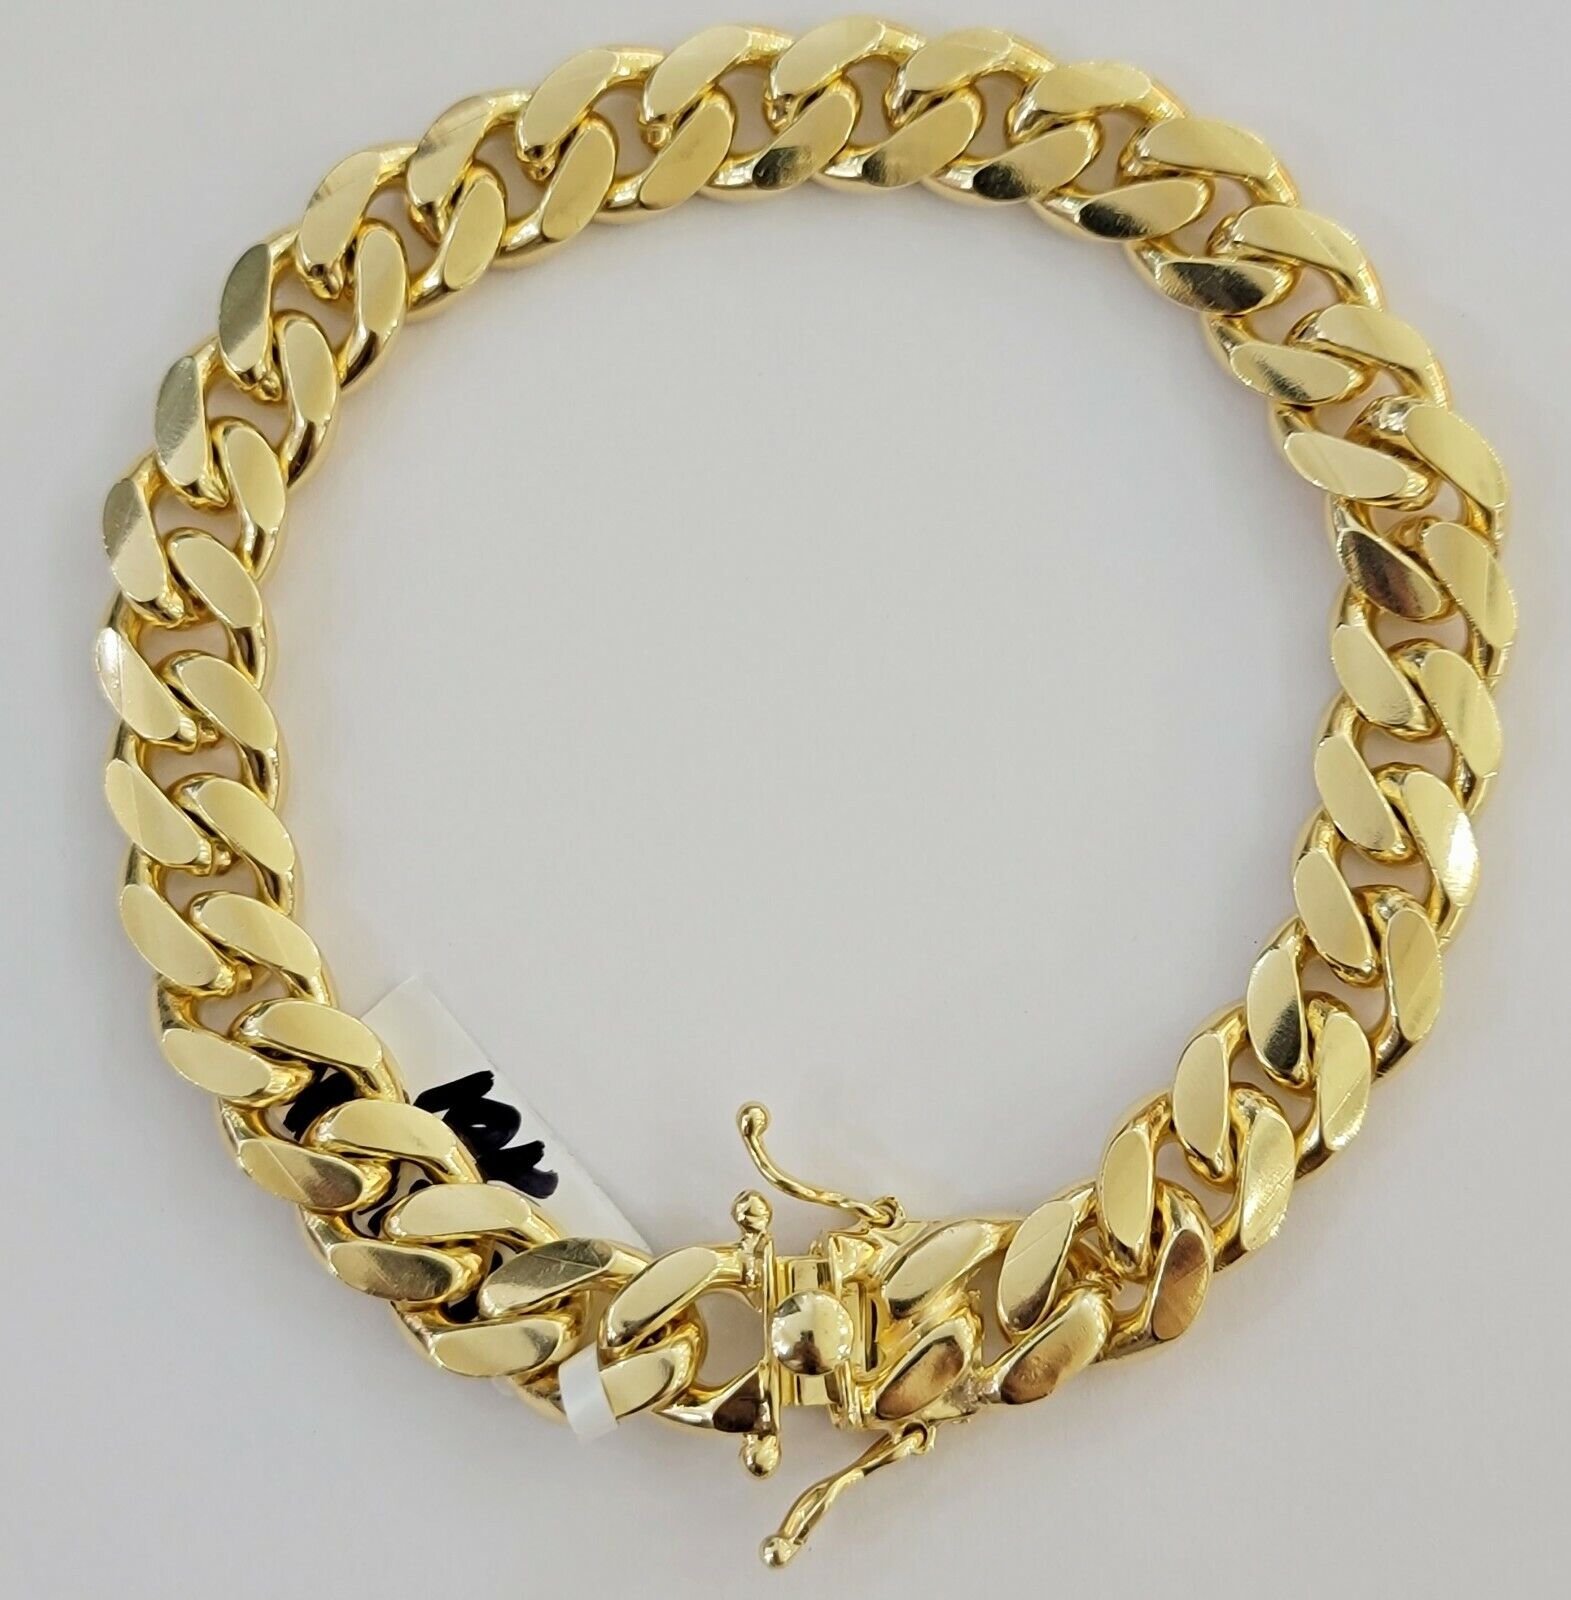 Mens 10k Gold Bracelet 8 Inch Miami Cuban Link 11mm Solid 10KT Yellow Gold REAL